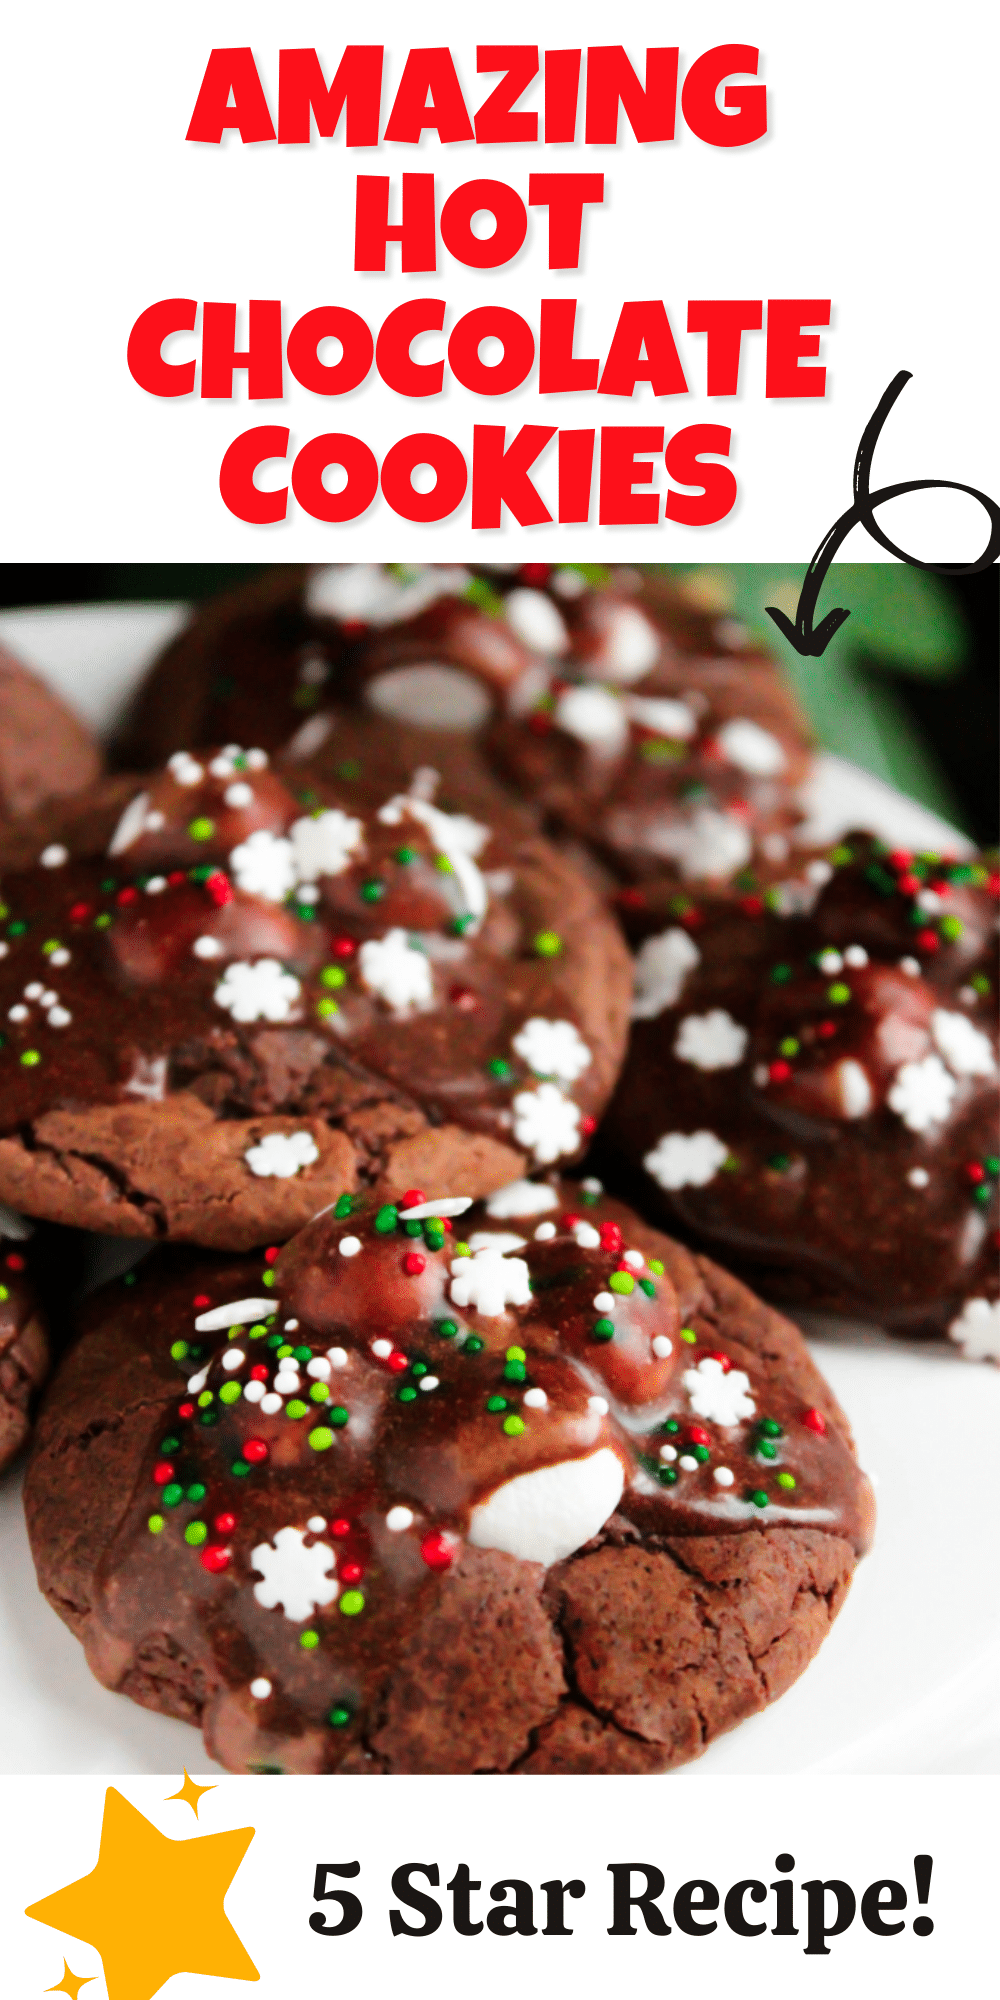 Hot Chocolate Cookies are so popular in our family that I end up making dozens and dozens for family members during the holidays! They’re rich chocolate cookies with melted marshmallows stacked on top with a chocolate glaze drizzle and sprinkles to finish them off.  
 via @bigbearswife